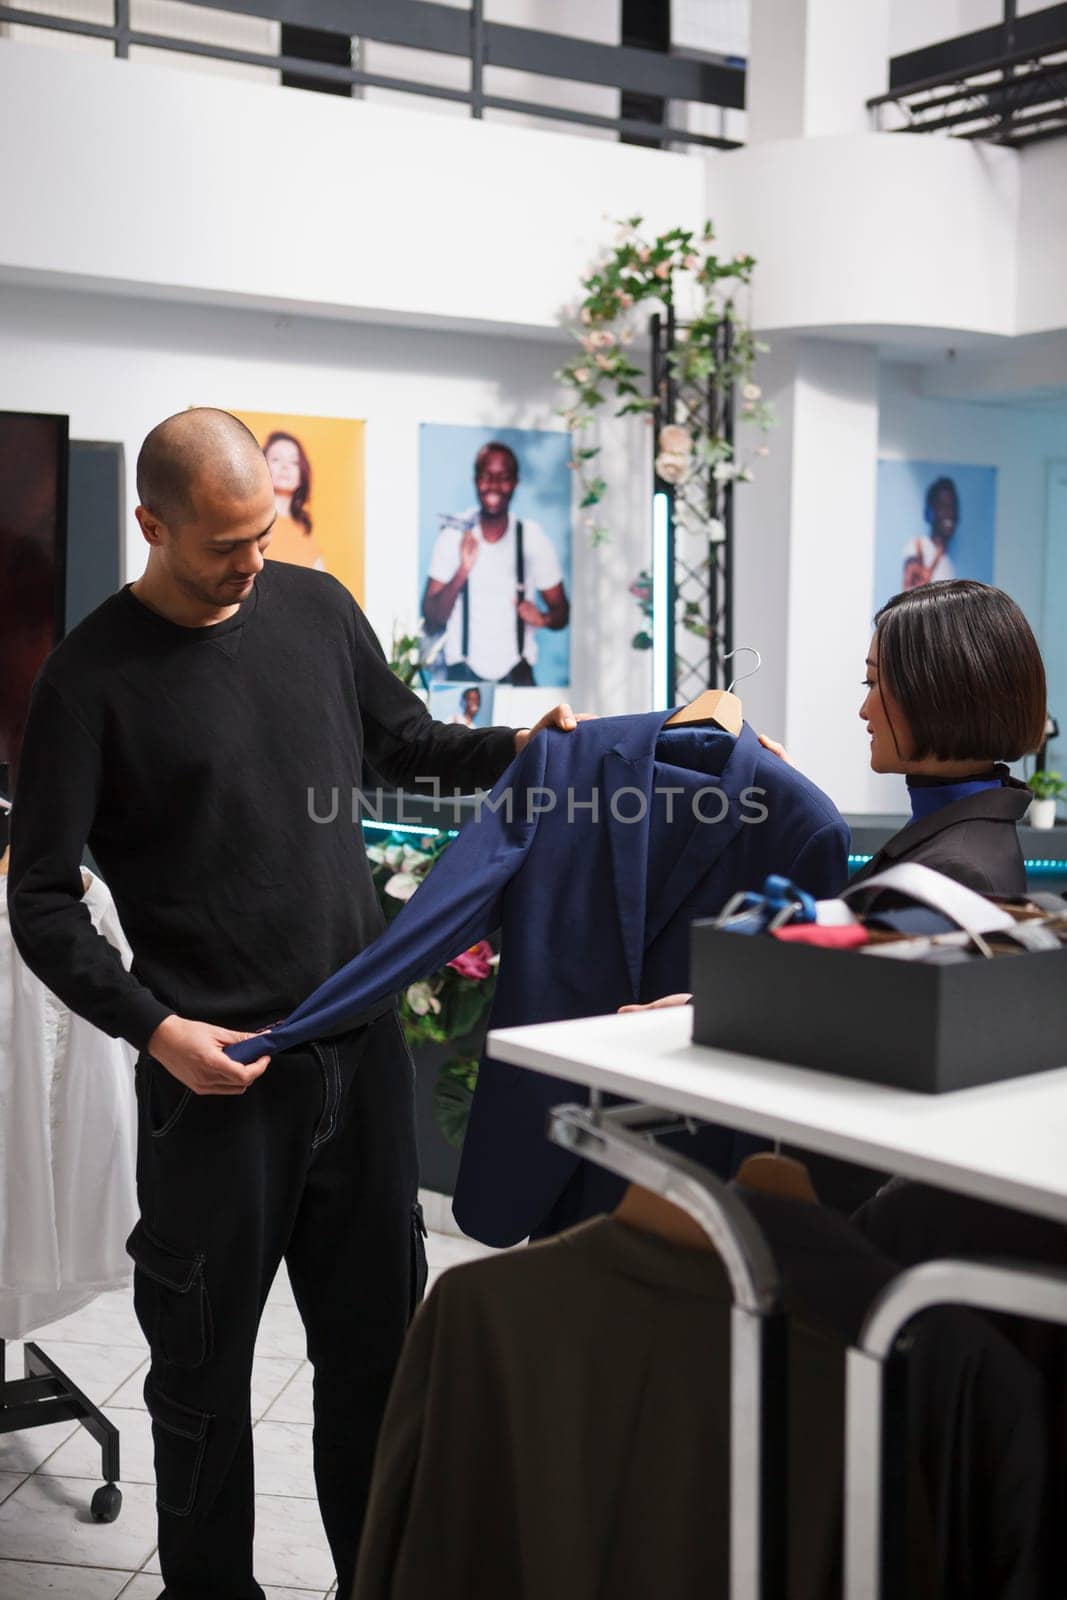 Arab man examining apparel size and style while talking with clothing store consultant. Shopping center fashion department employee giving buyer advice in selecting formal jacket